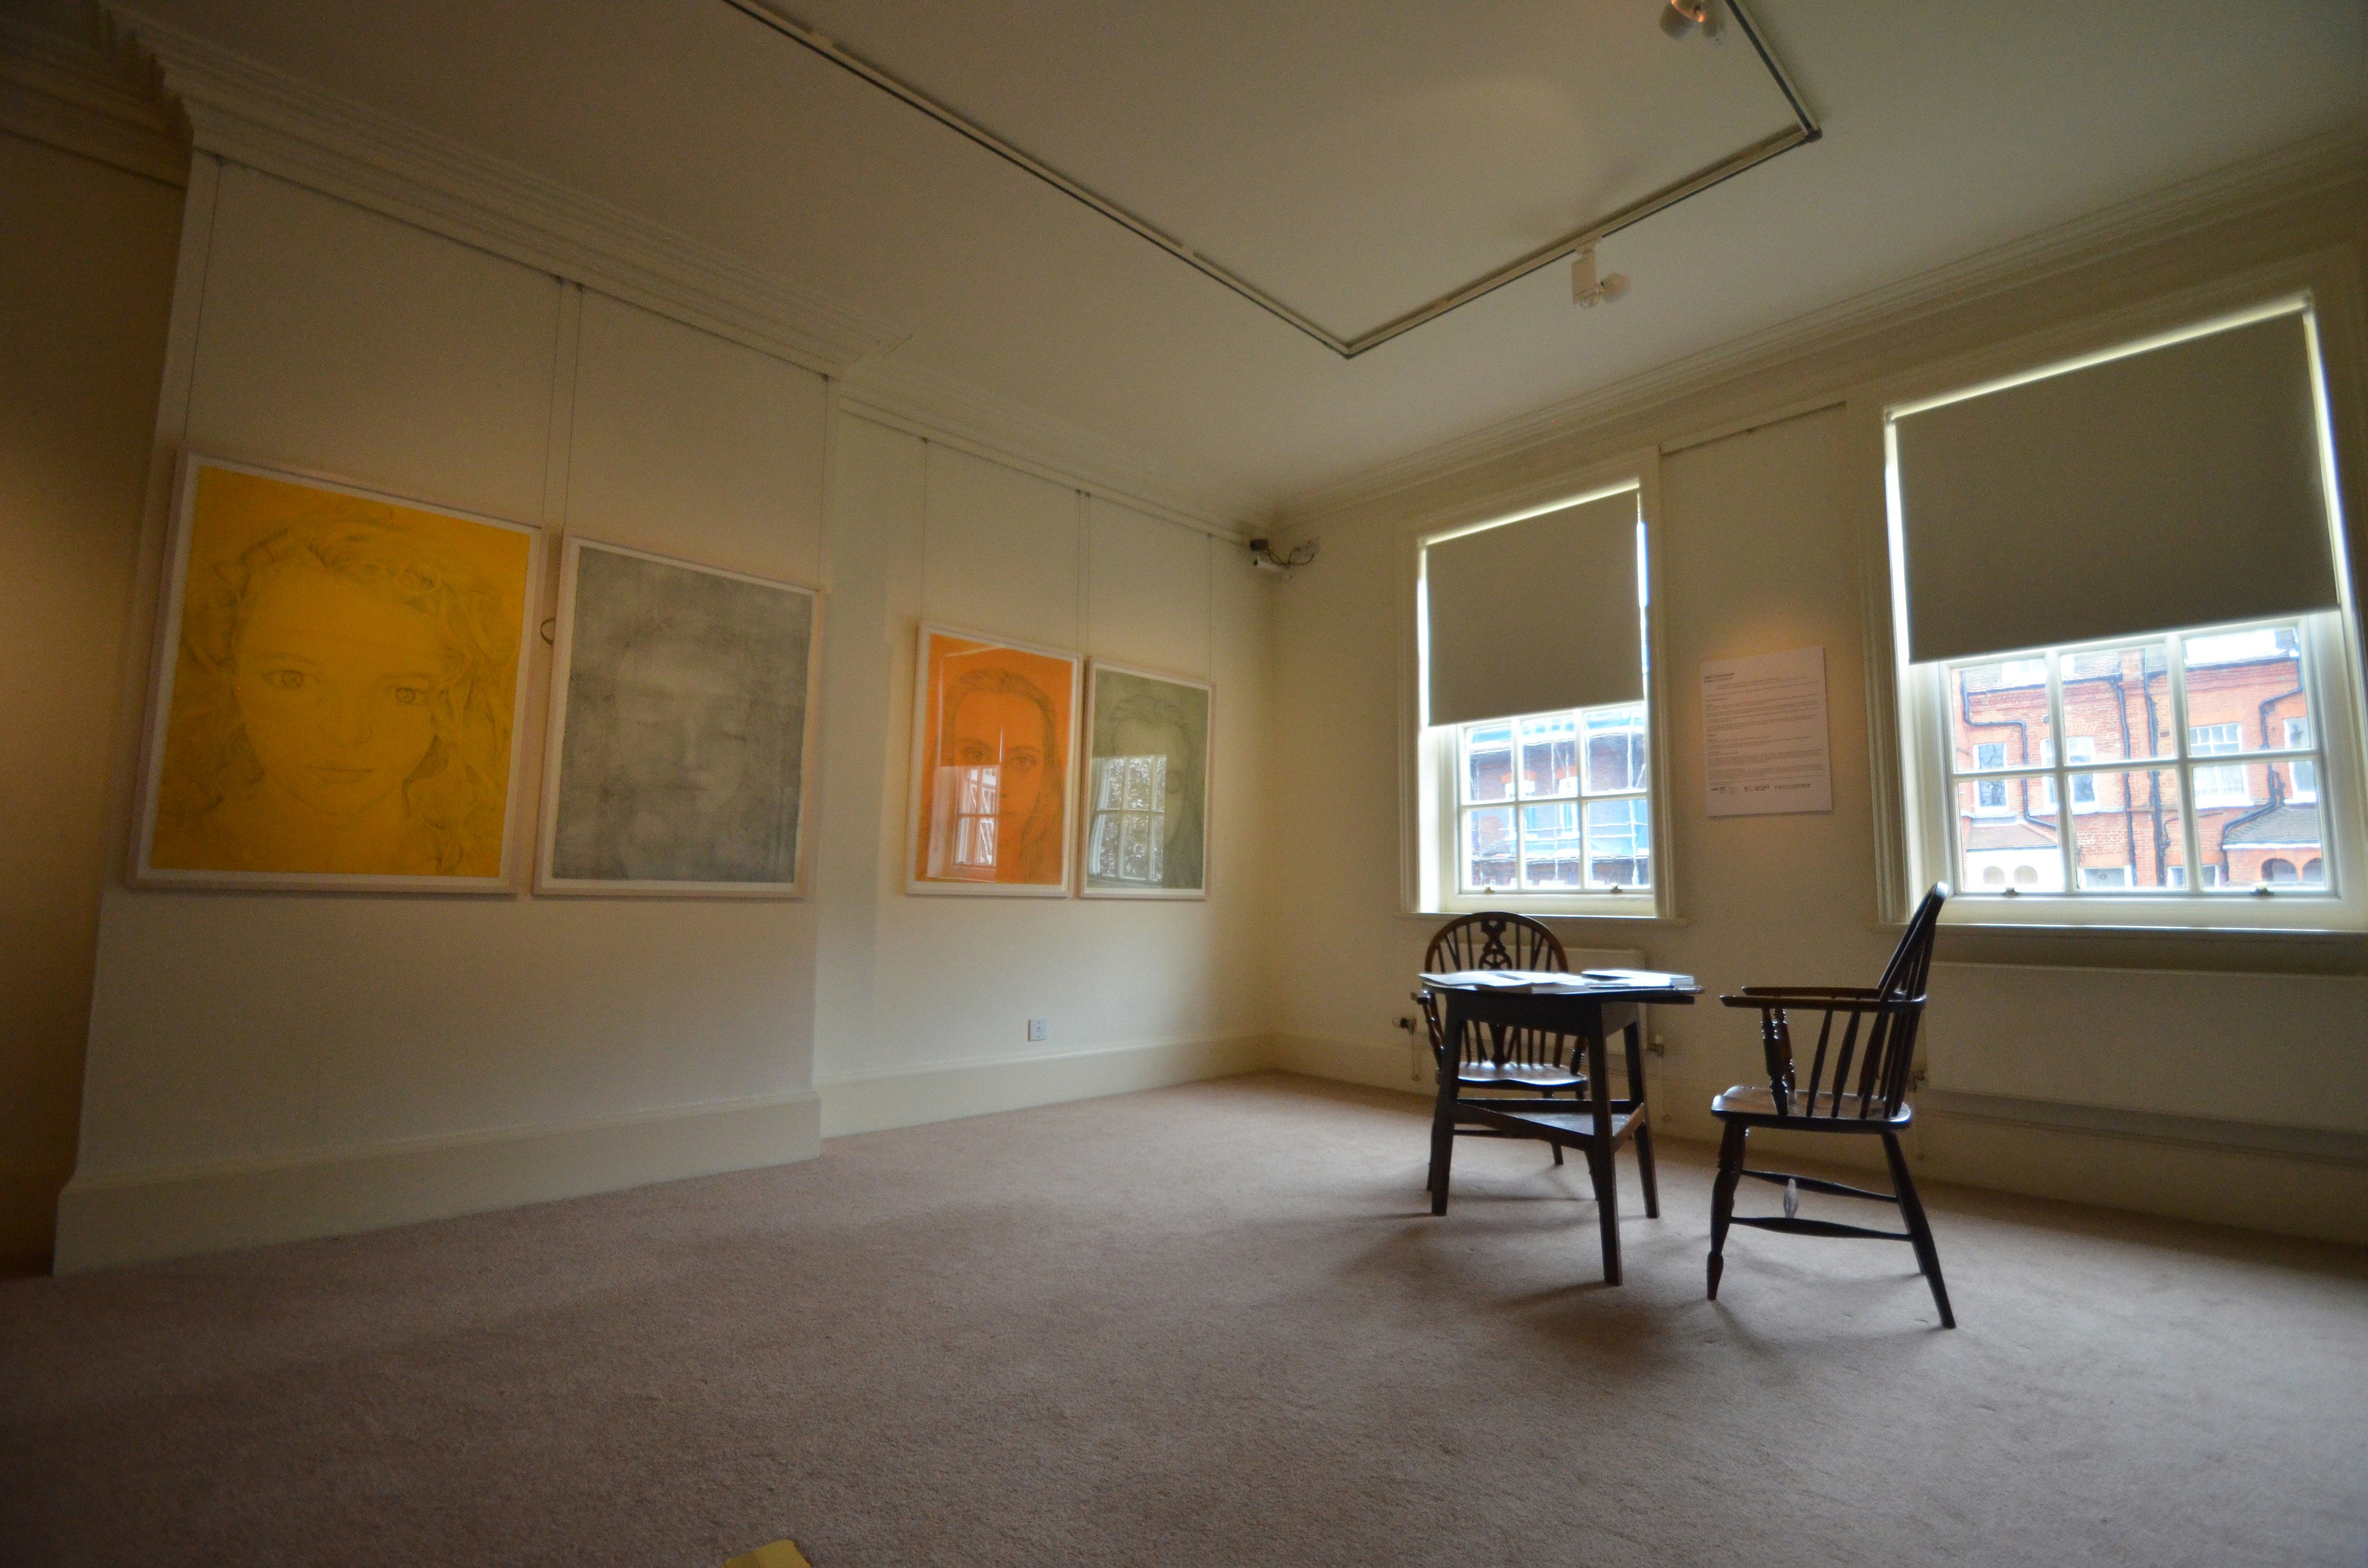 Event Venues in North London - Freud Museum London 